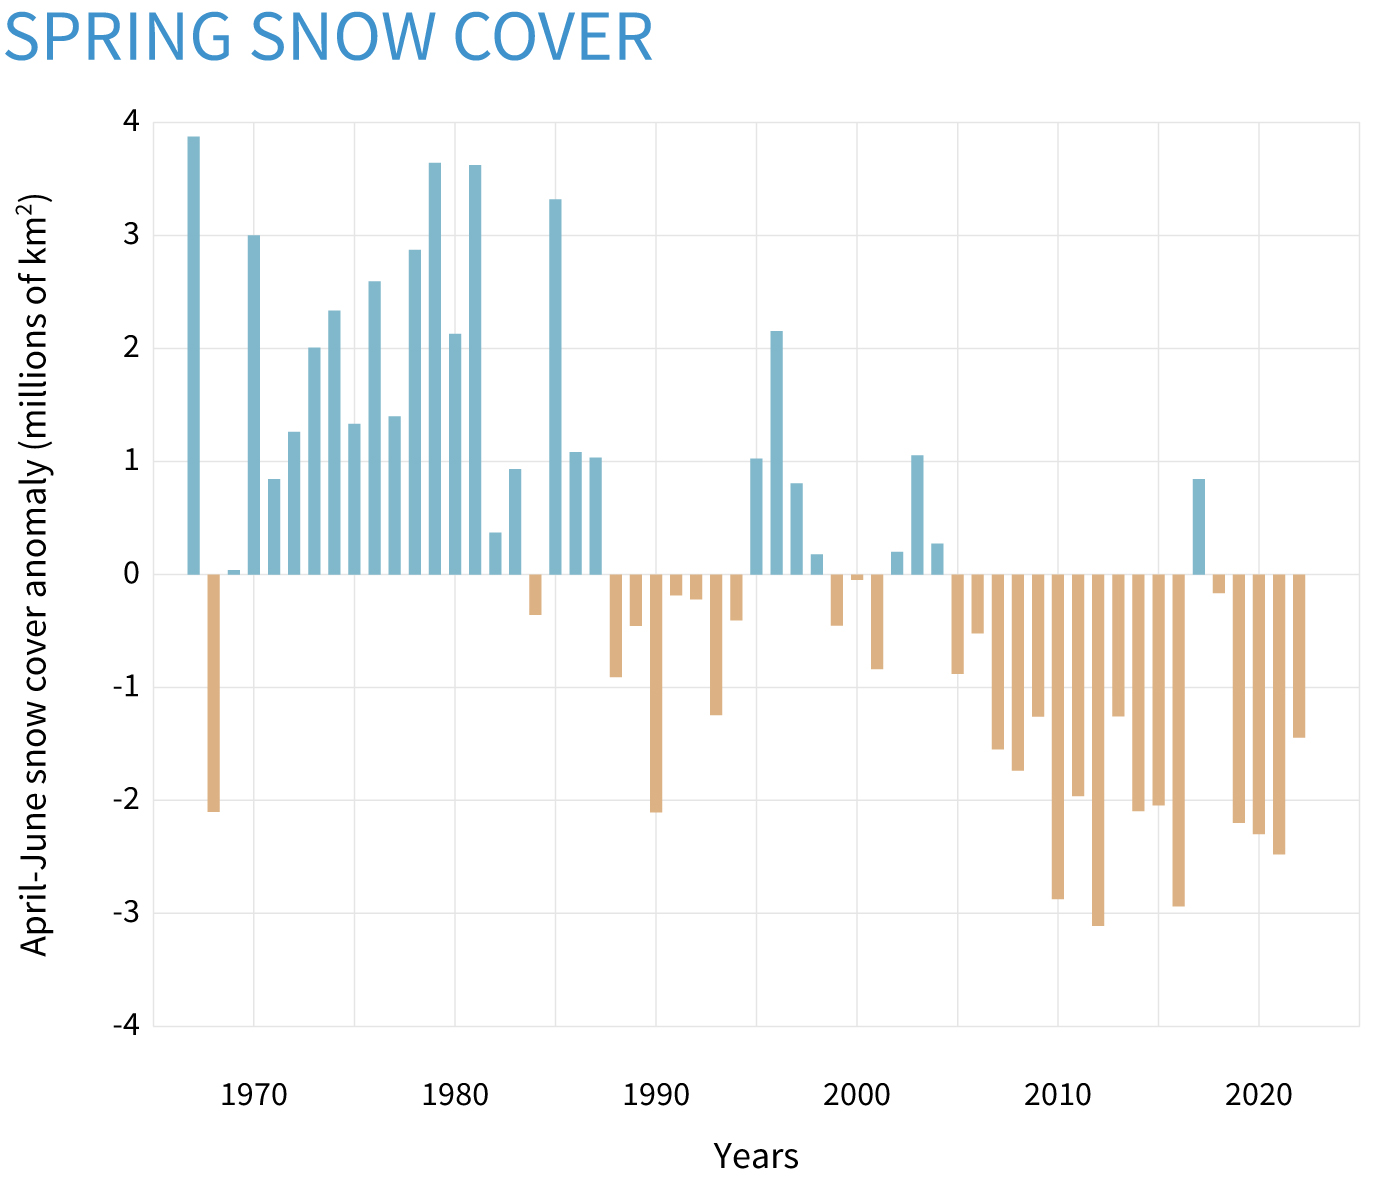 Bar graph of late spring (April-June) snow cover in the Northern Hemisphere compared to average